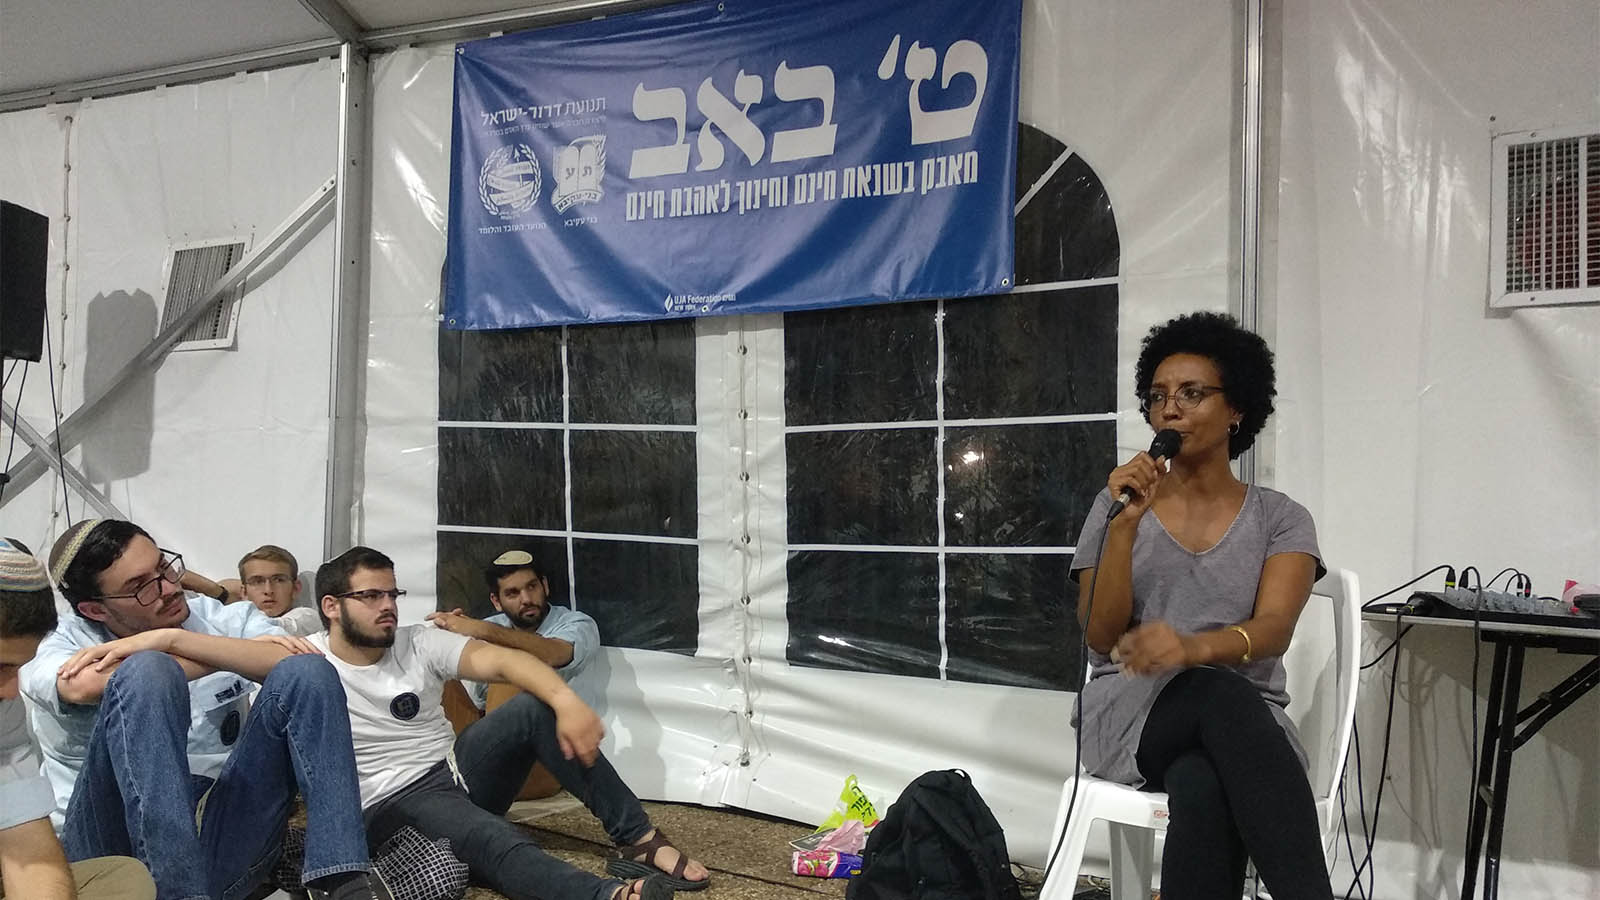 Mali Aklum, the daughter of Farede Aklum, at the 9th of Av Tent run by NOAL and Bnei Akiva youth movement, August 10, 2019 (Credit: Nitzan Zvi Cohen)